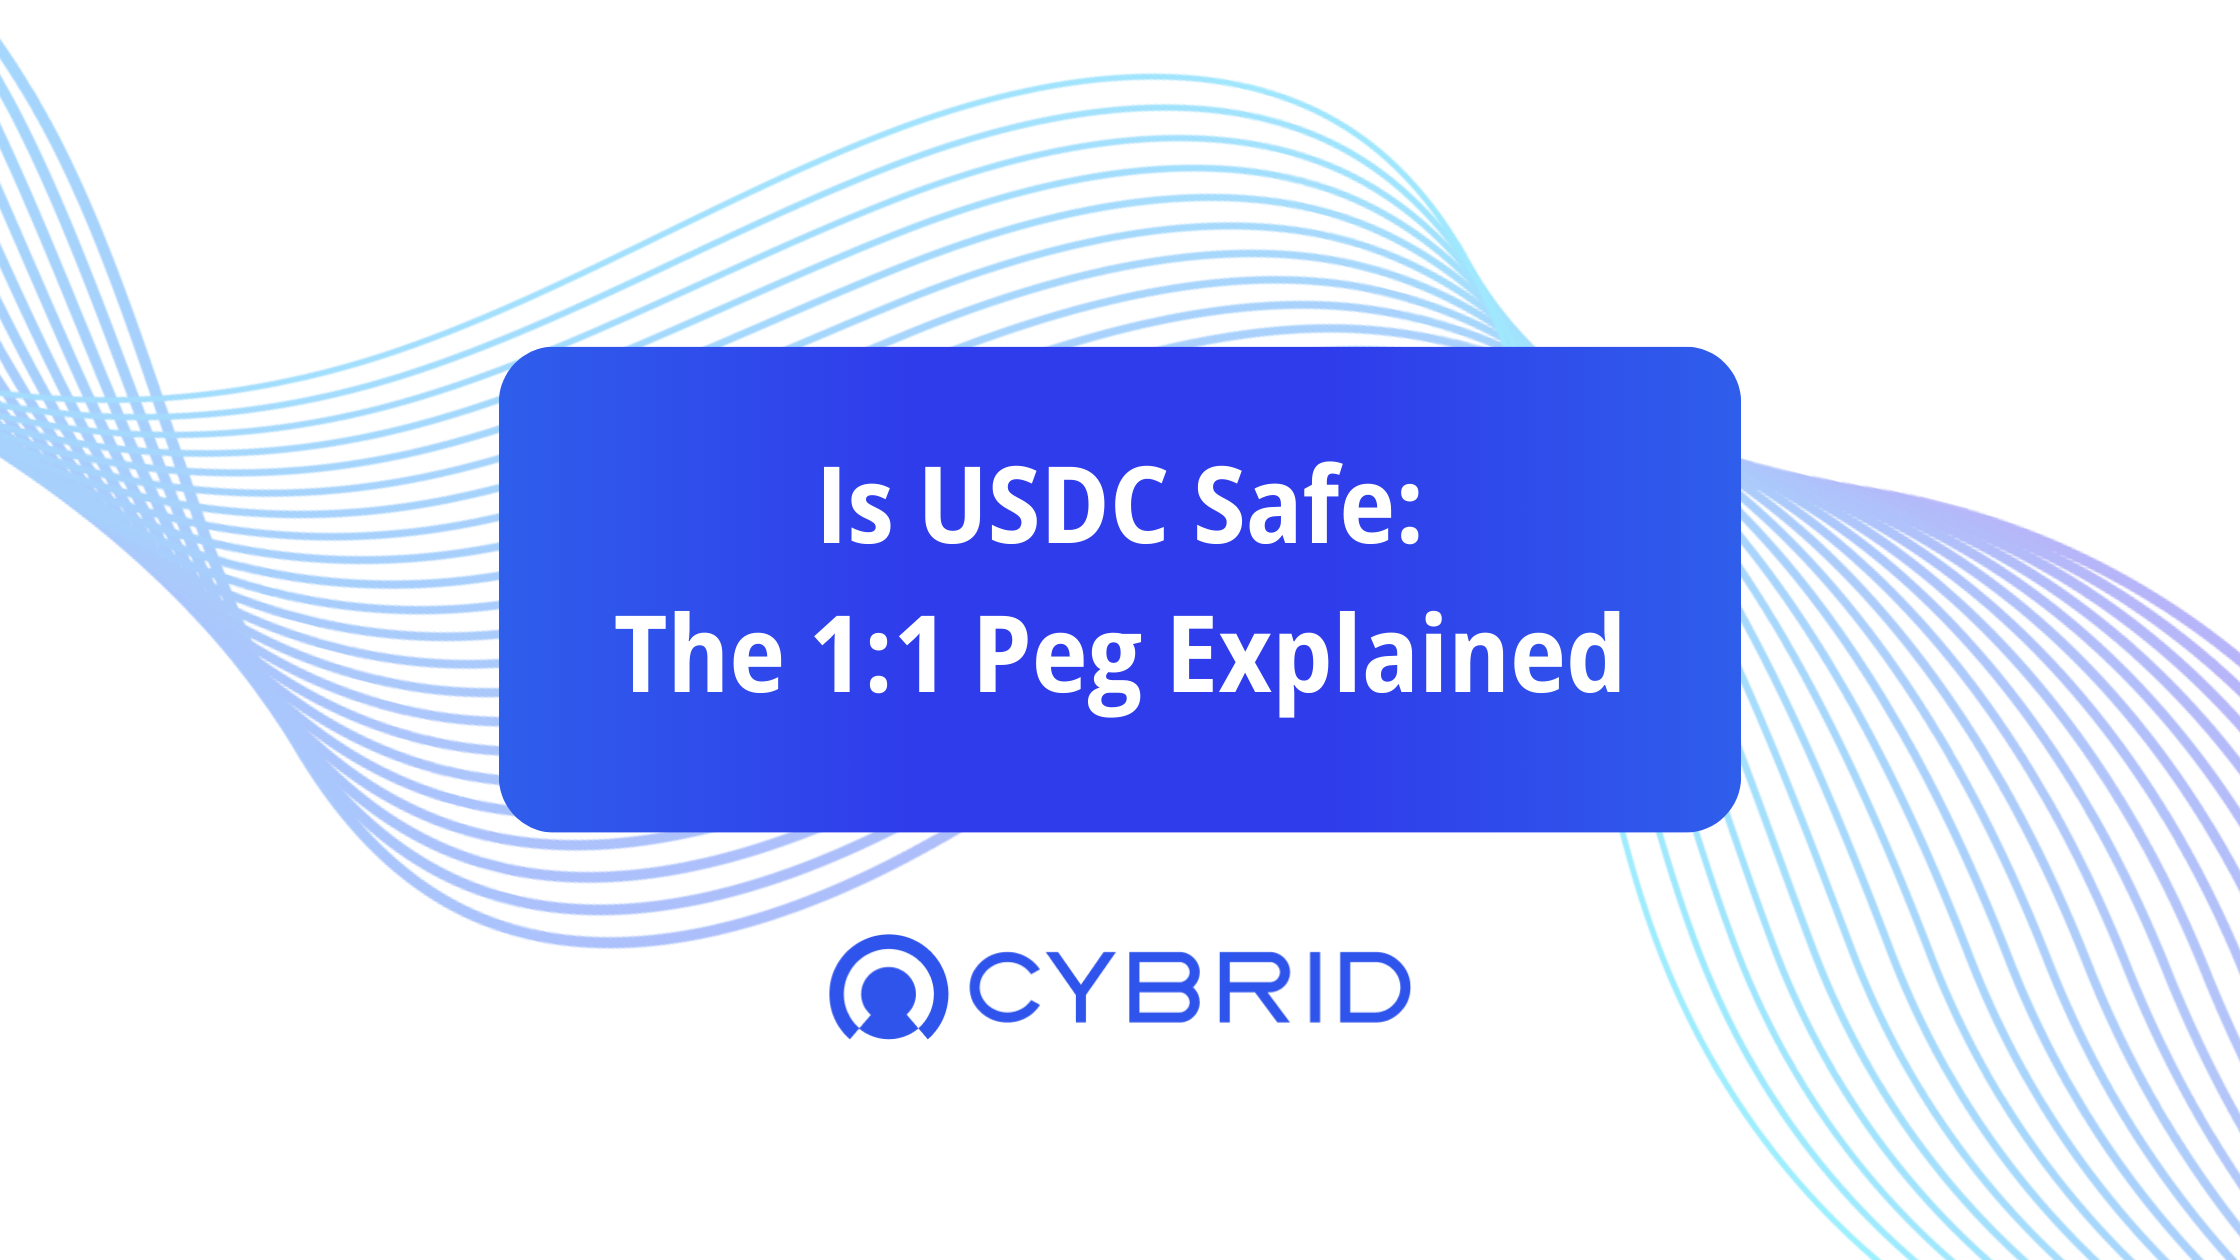 Is USDC Safe? 1 USD equals 1 USDC. Stability for Global Commerce.